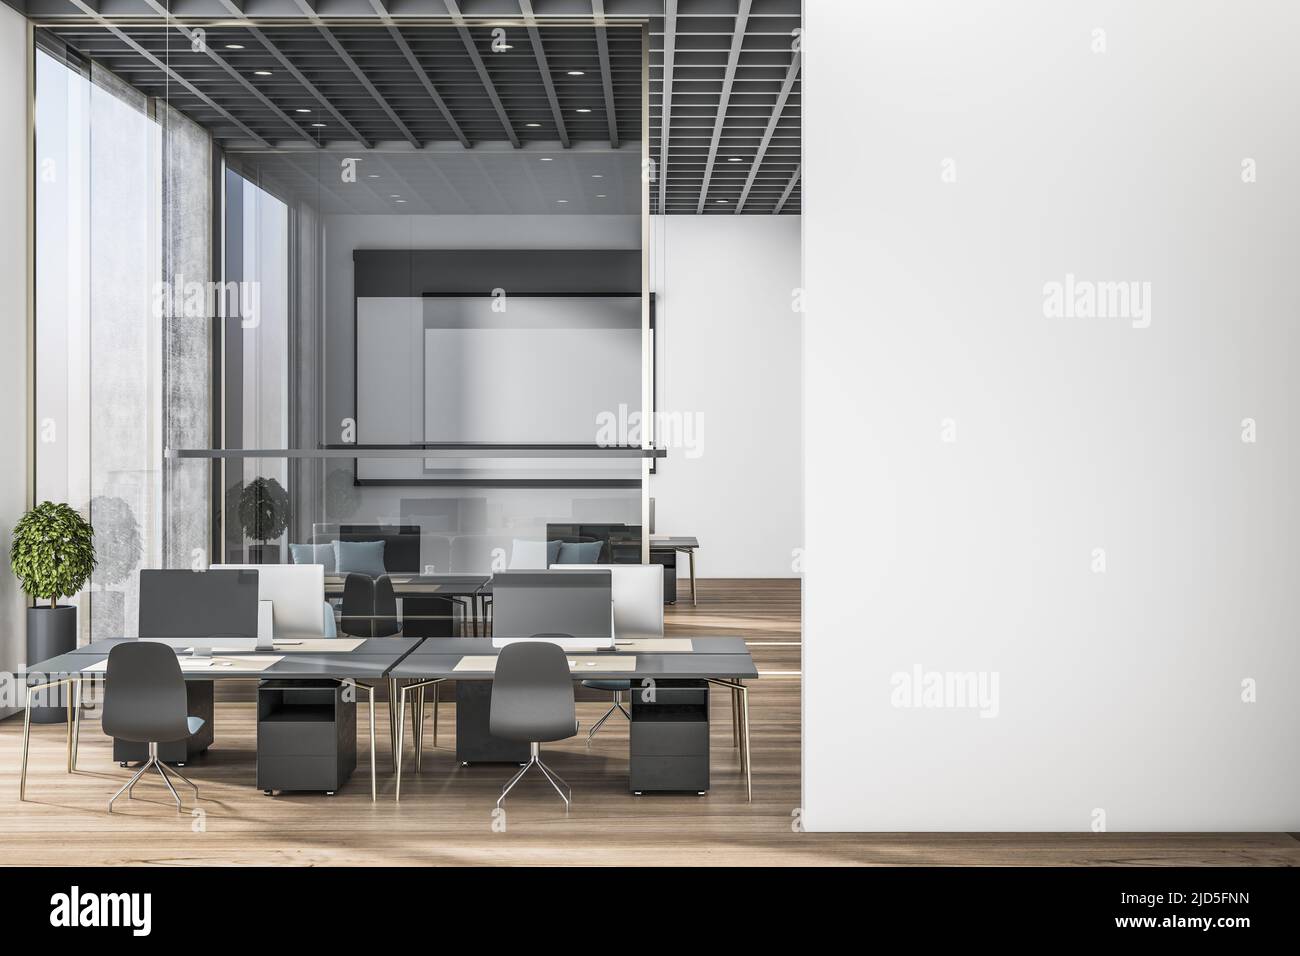 Blank light wall in modern stylish open space office with black work places divided by transparent glass partitions and wooden floor. 3D rendering, mo Stock Photo